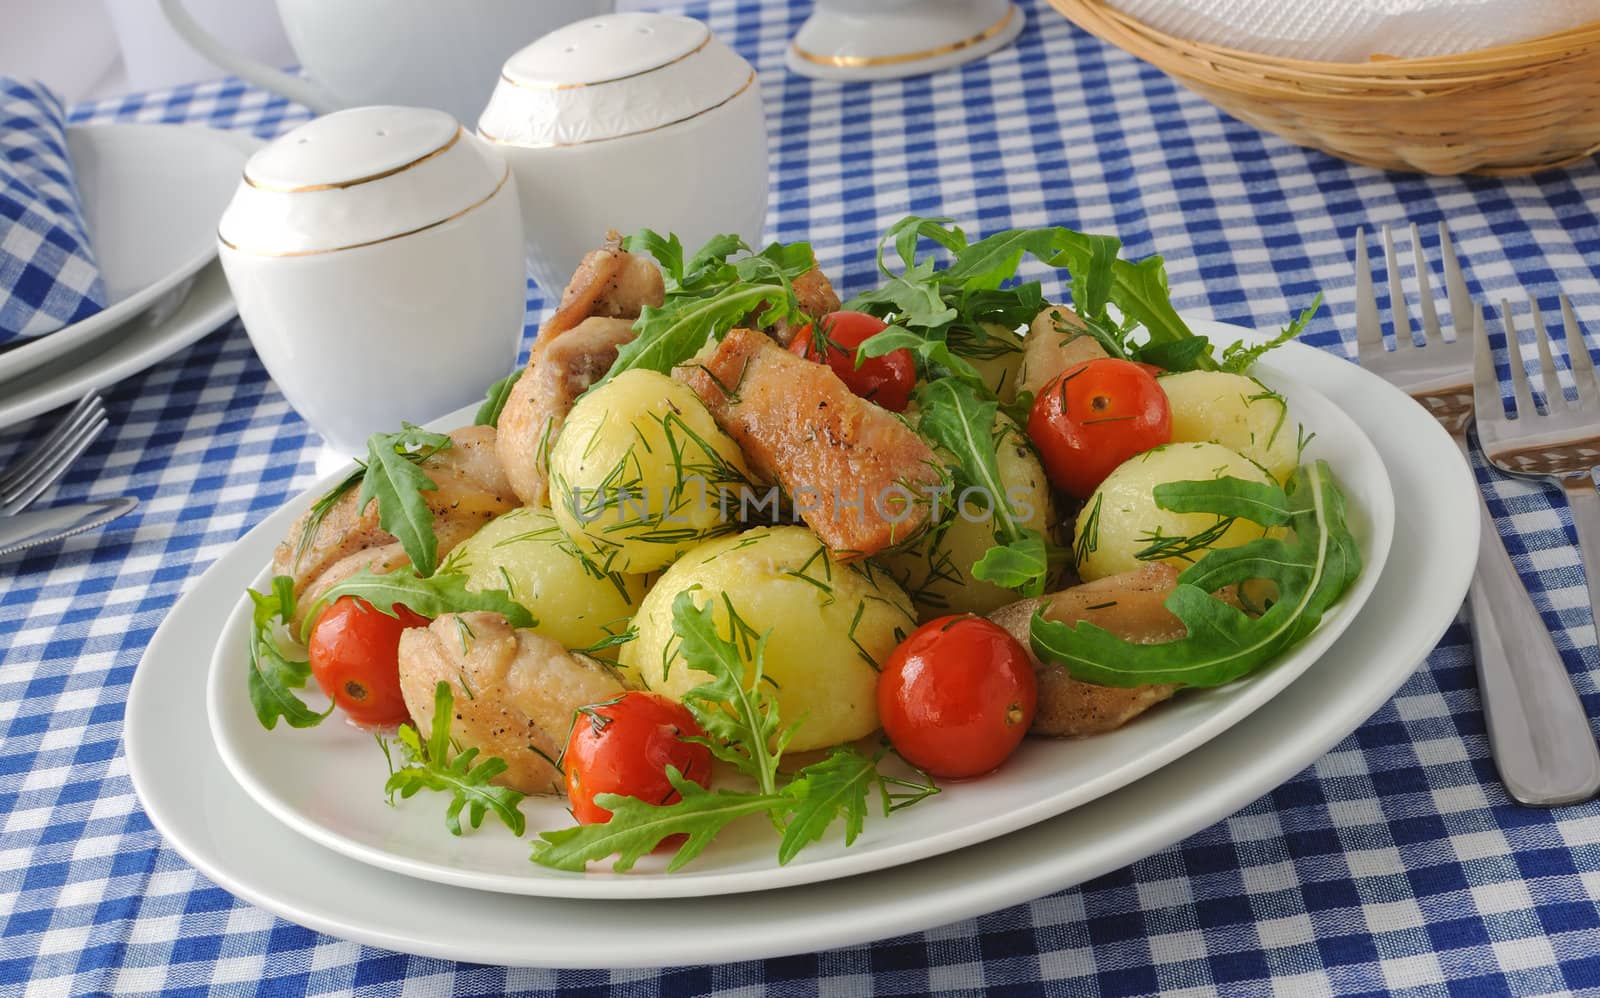  Boiled potatoes with chicken, arugula and tomato